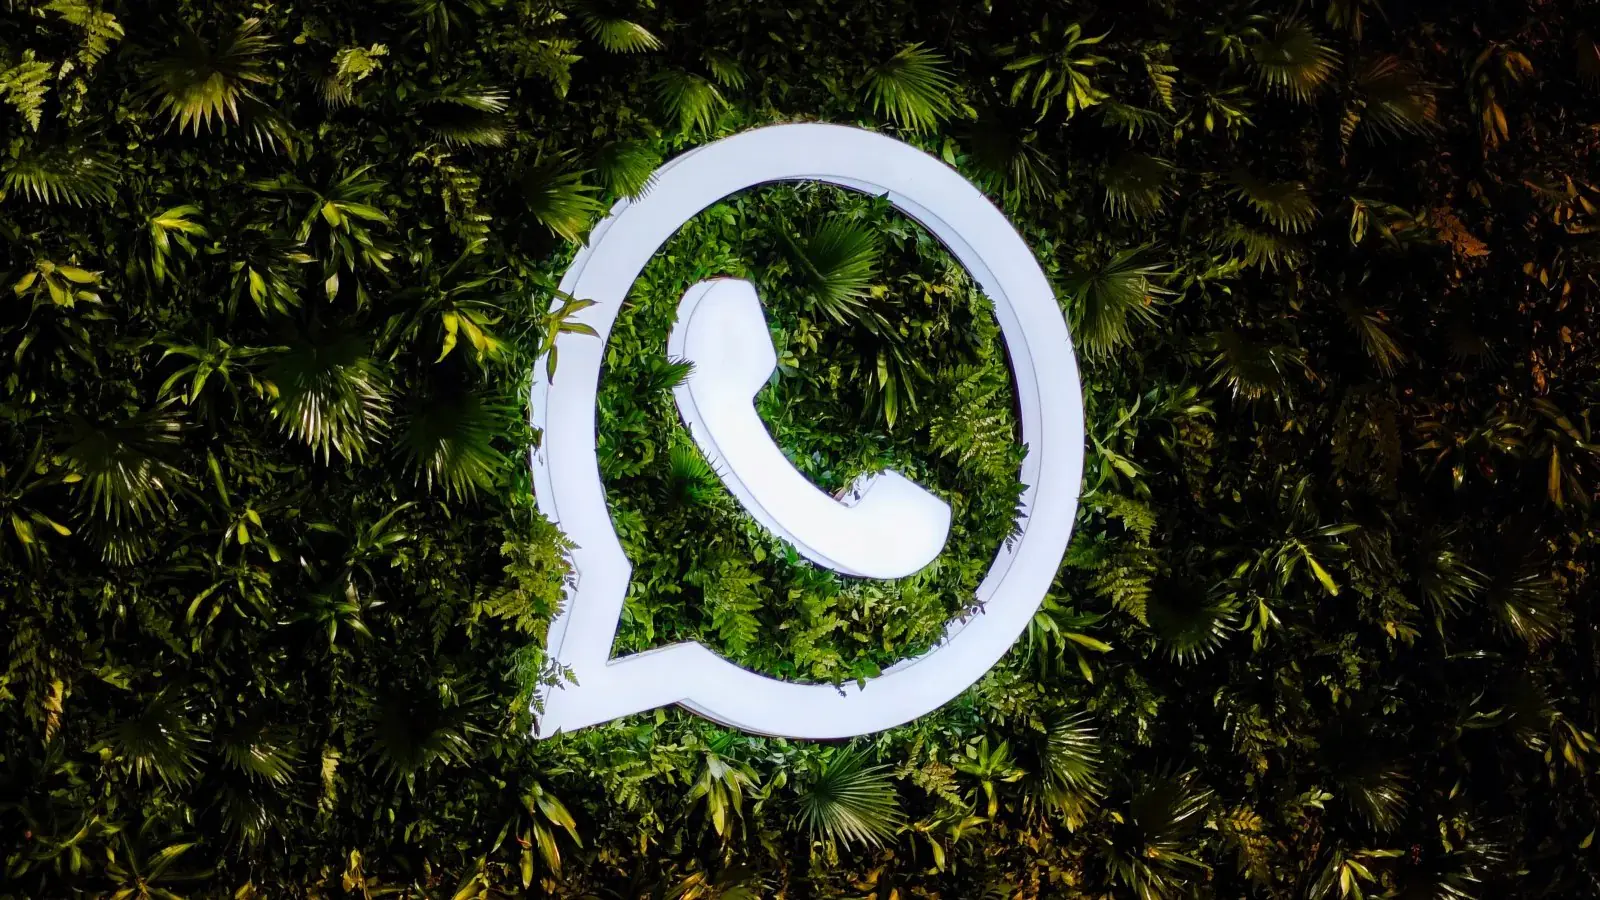 WhatsApp Update: Now you can reply to photos and videos in a new way, beta testing is happening